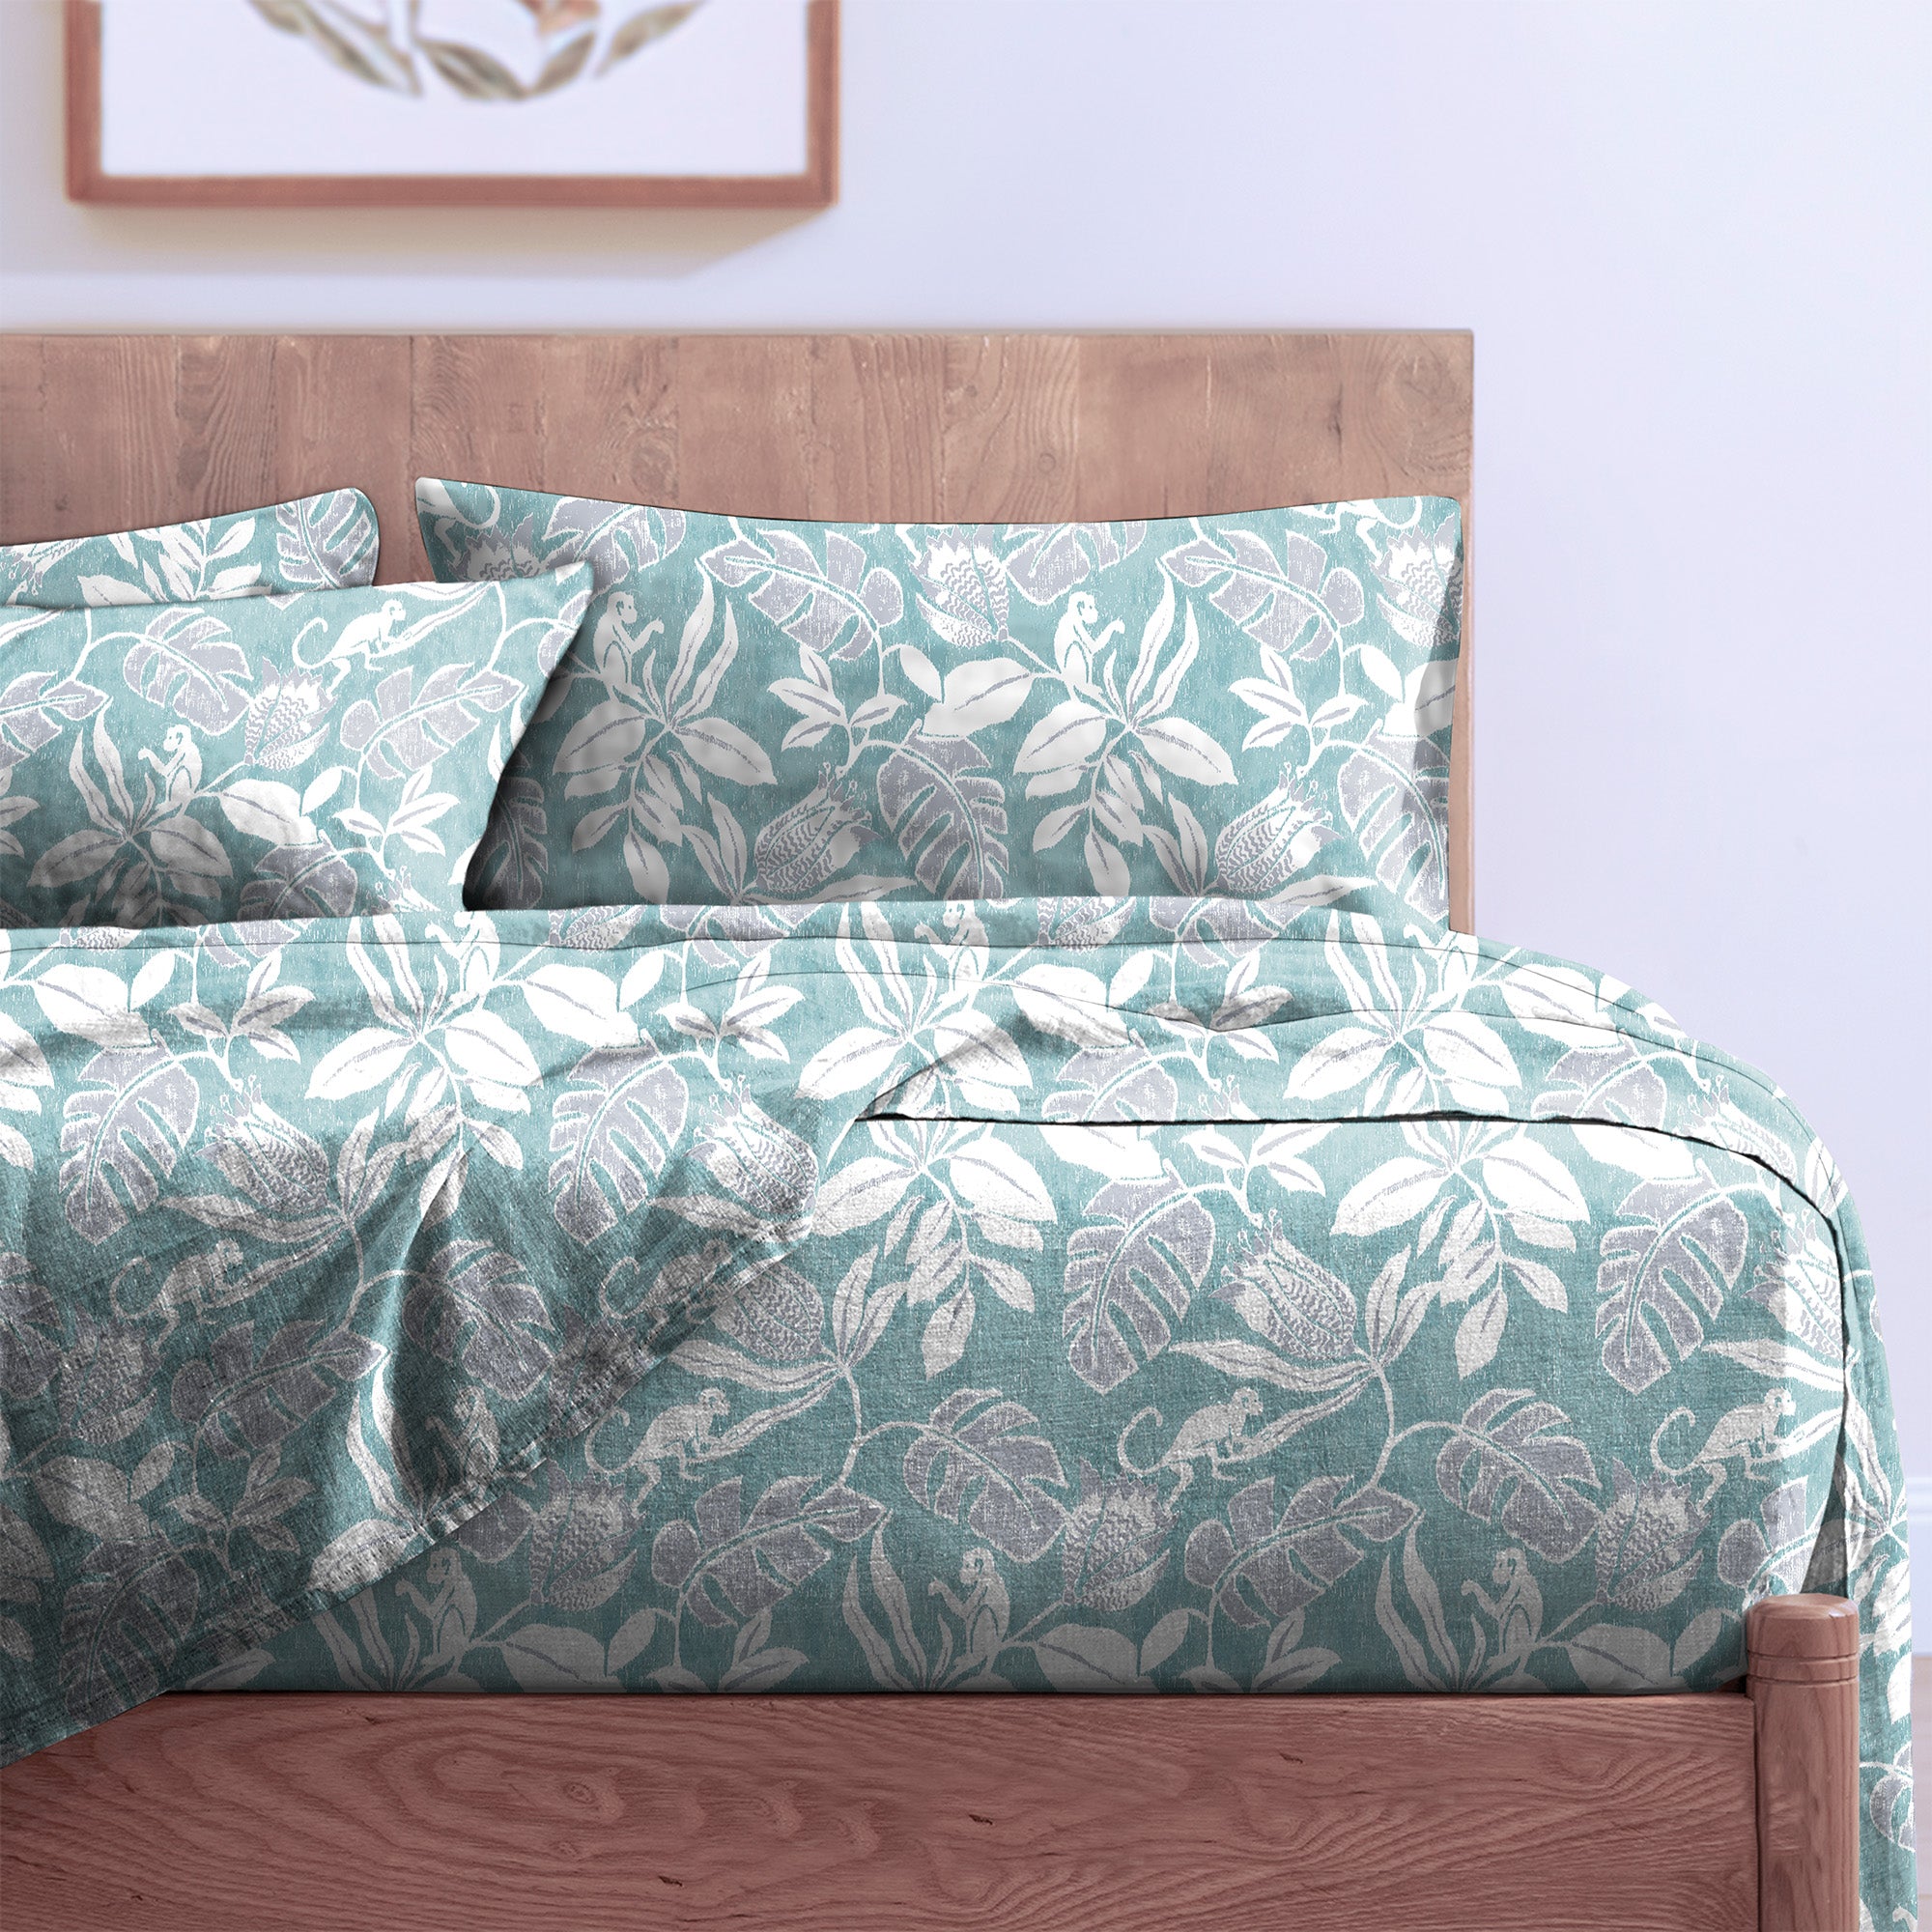 SAVANNA ALOE BEDCOVER FOR DOUBLE BED WITH 2 PILLOWCOVERS KING SIZE (104" X 90")